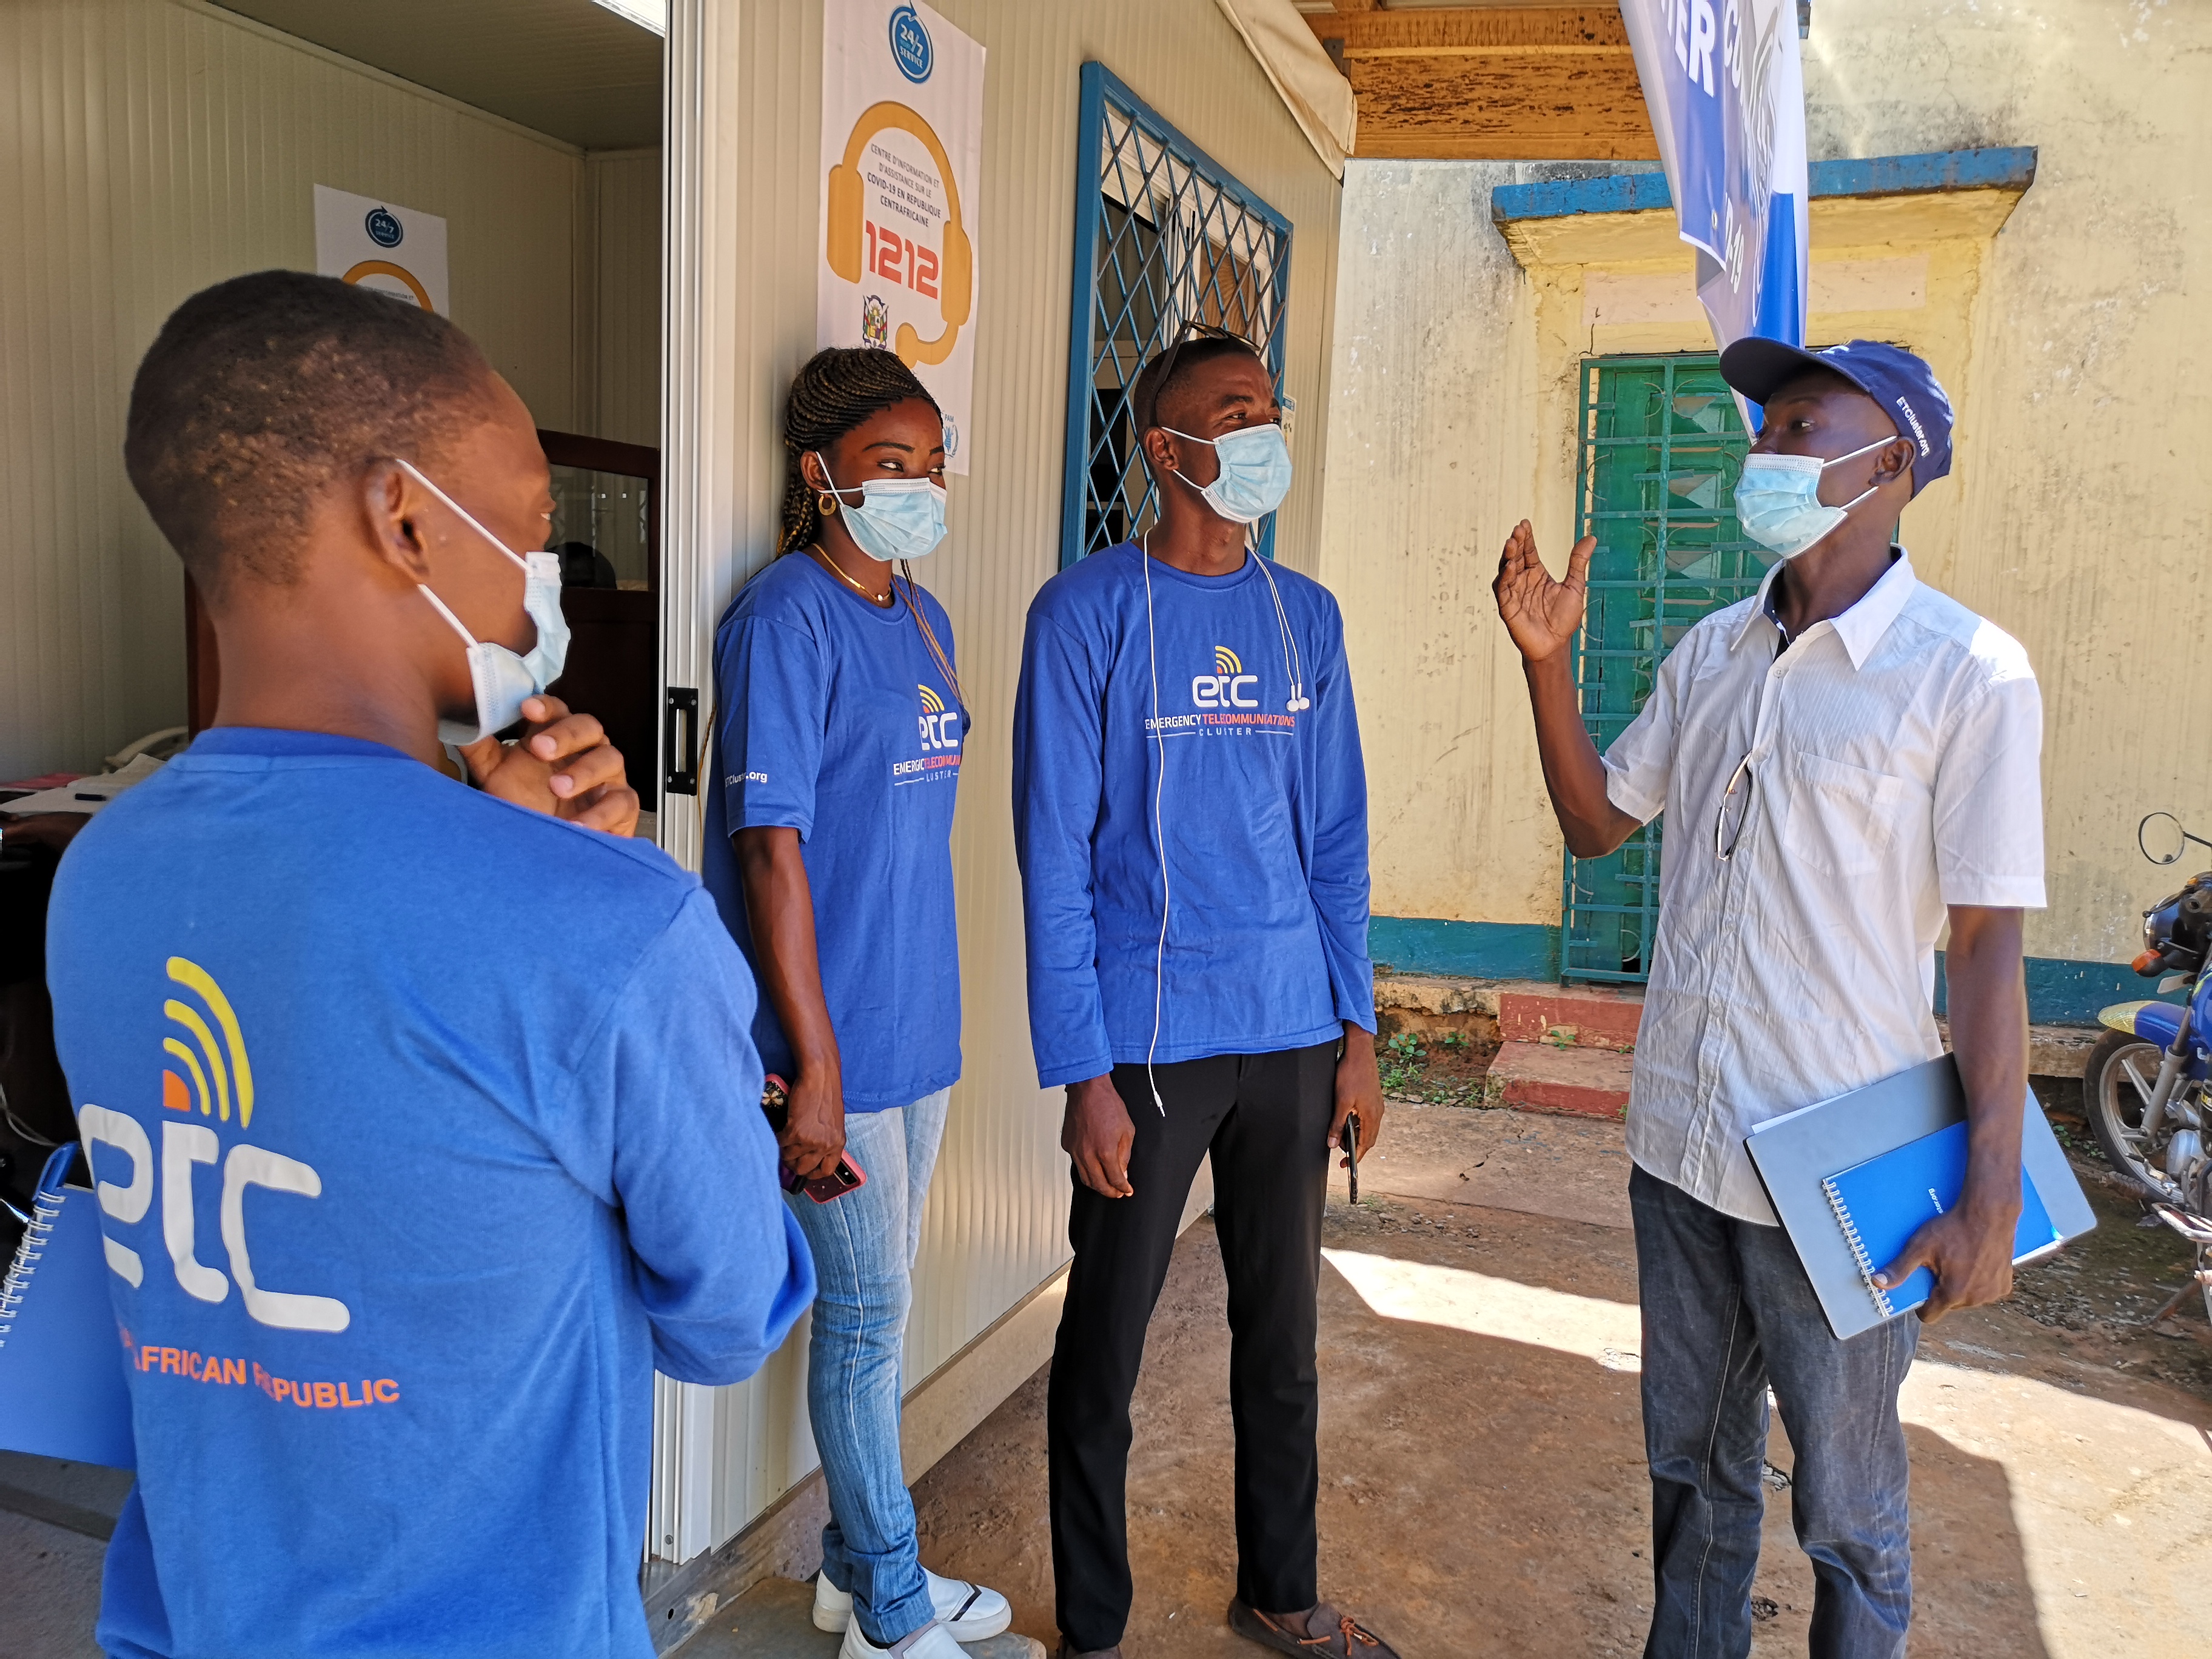 Modiana (right), gives his team instructions at the 1212 call centre which has become an interface between the people of CAR and the national Ministry of Health. Photo: WFP/Elizabeth Millership